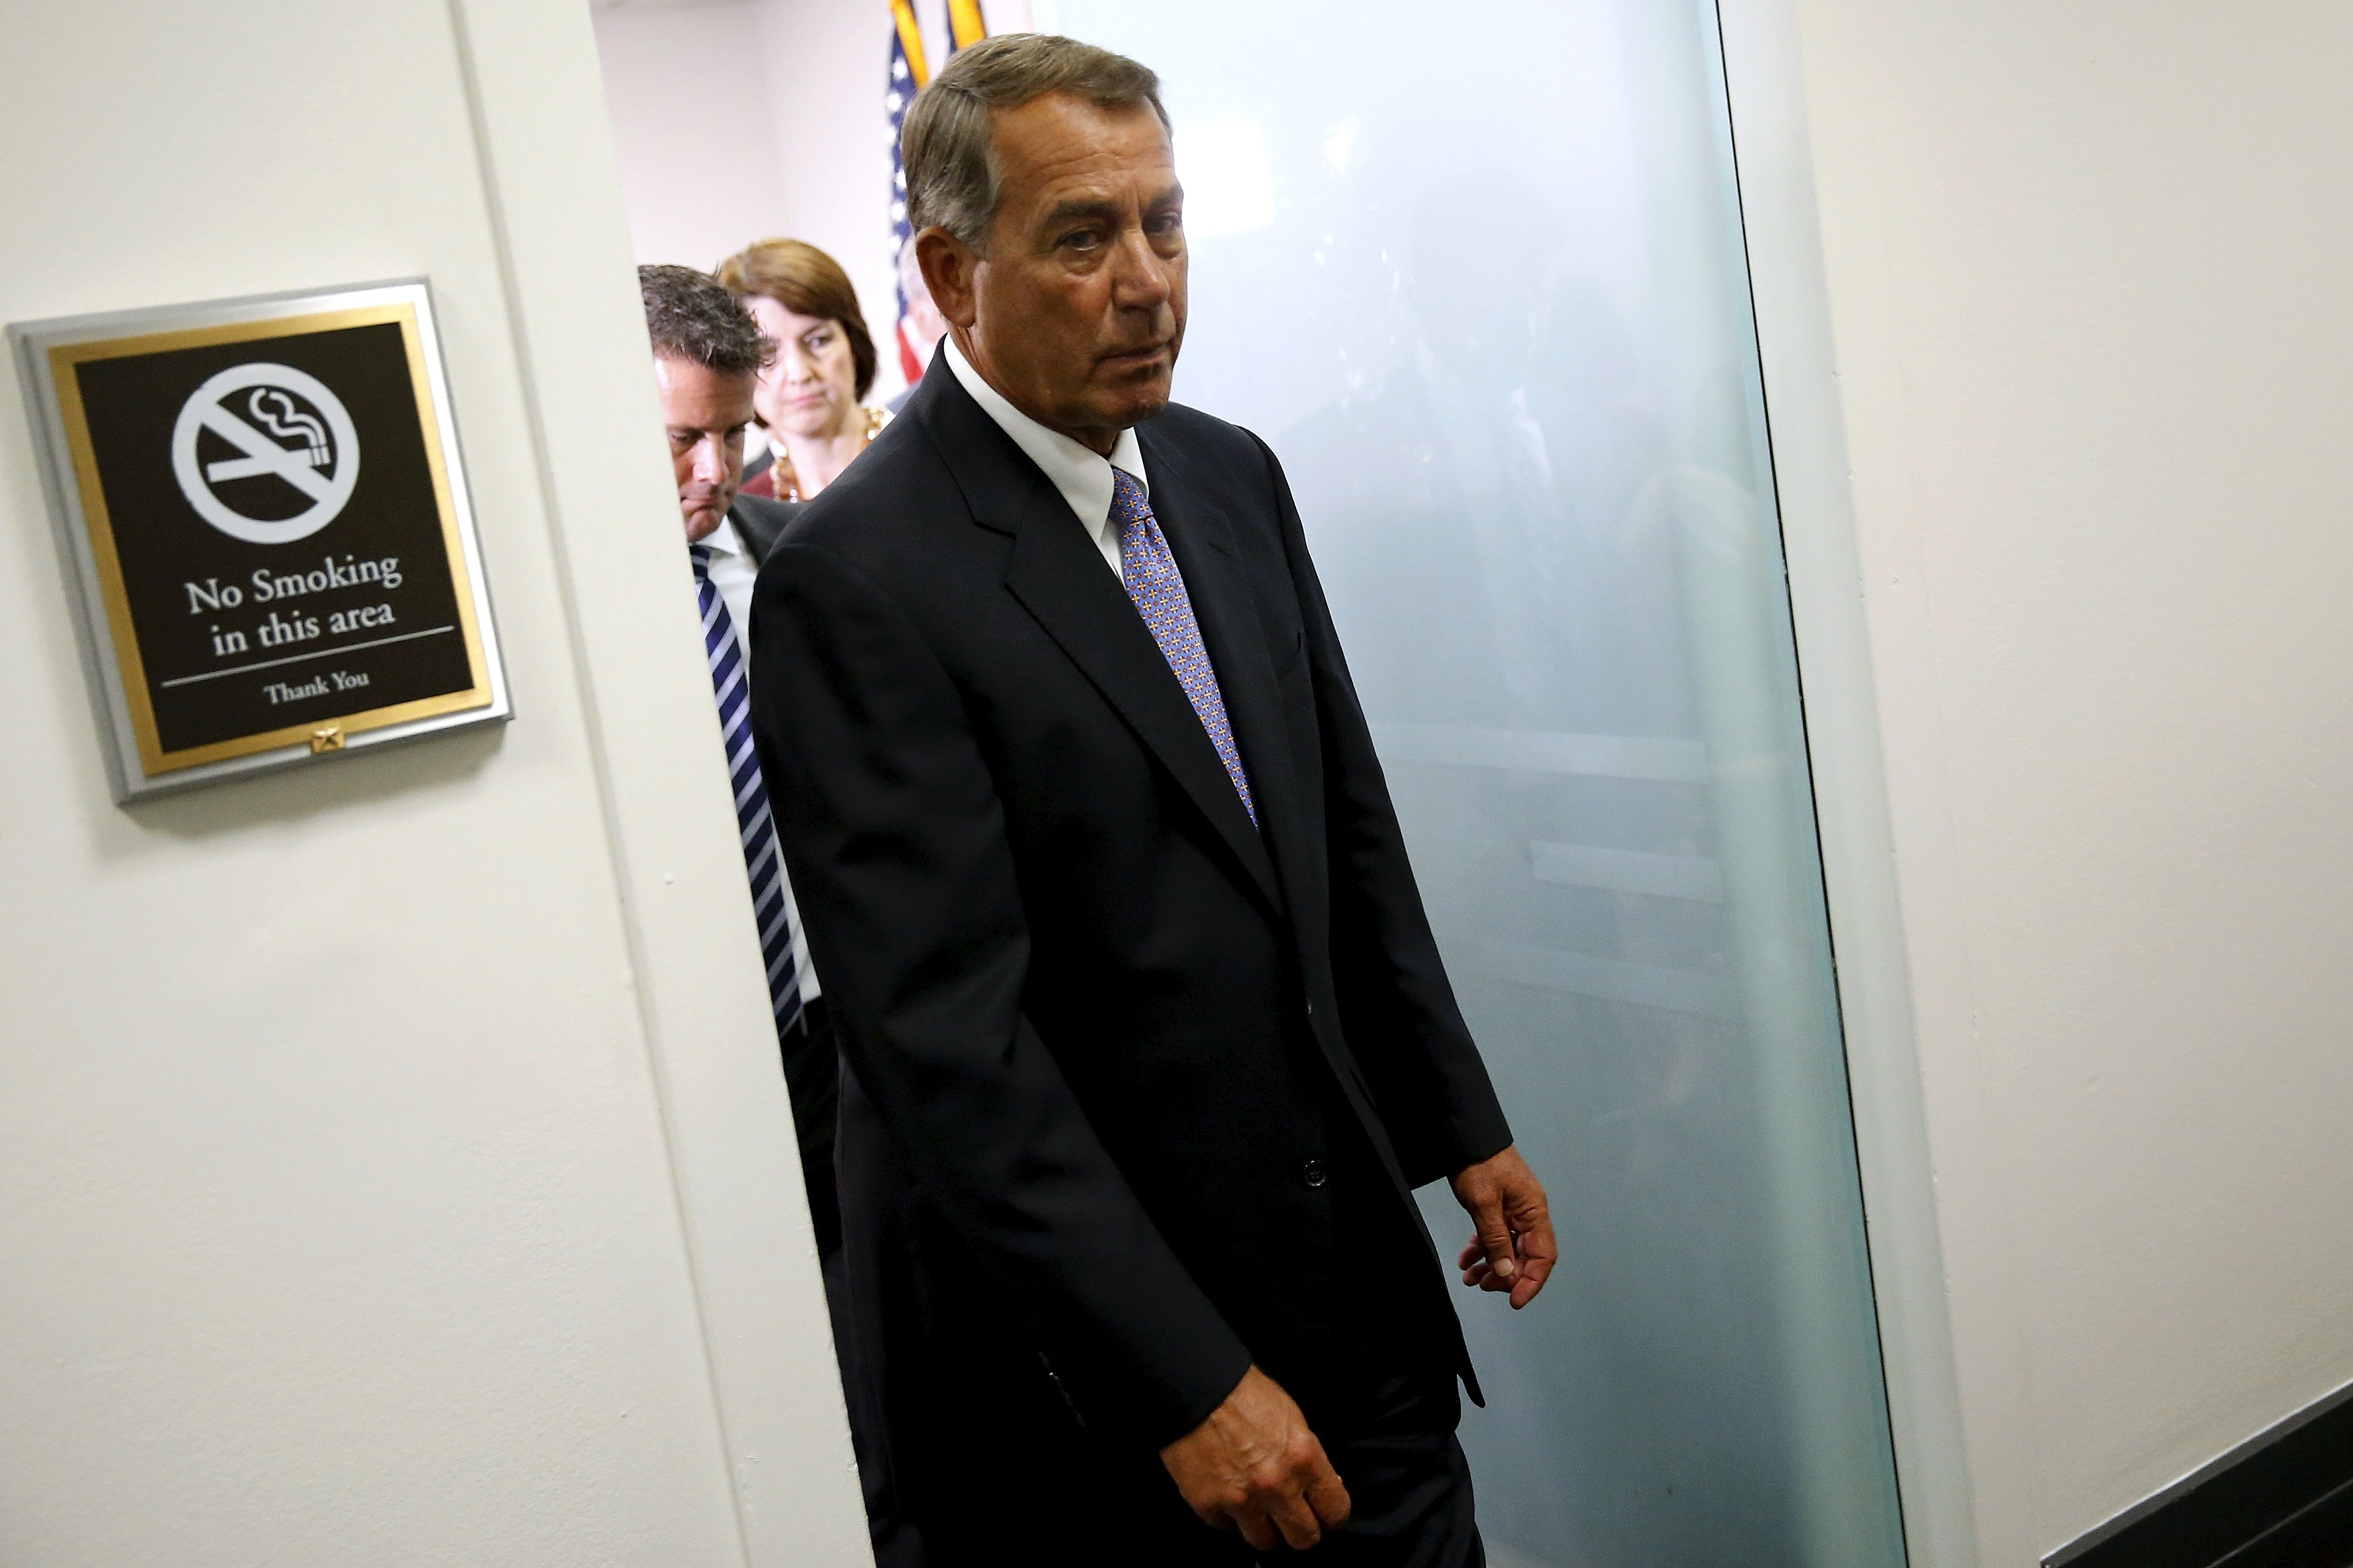 U.S. House Speaker John Boehner (R-OH) departs after a news conference following a House Republican caucus meeting at the U.S. Capitol in Washington September 9, 2015. Photo: REUTERS